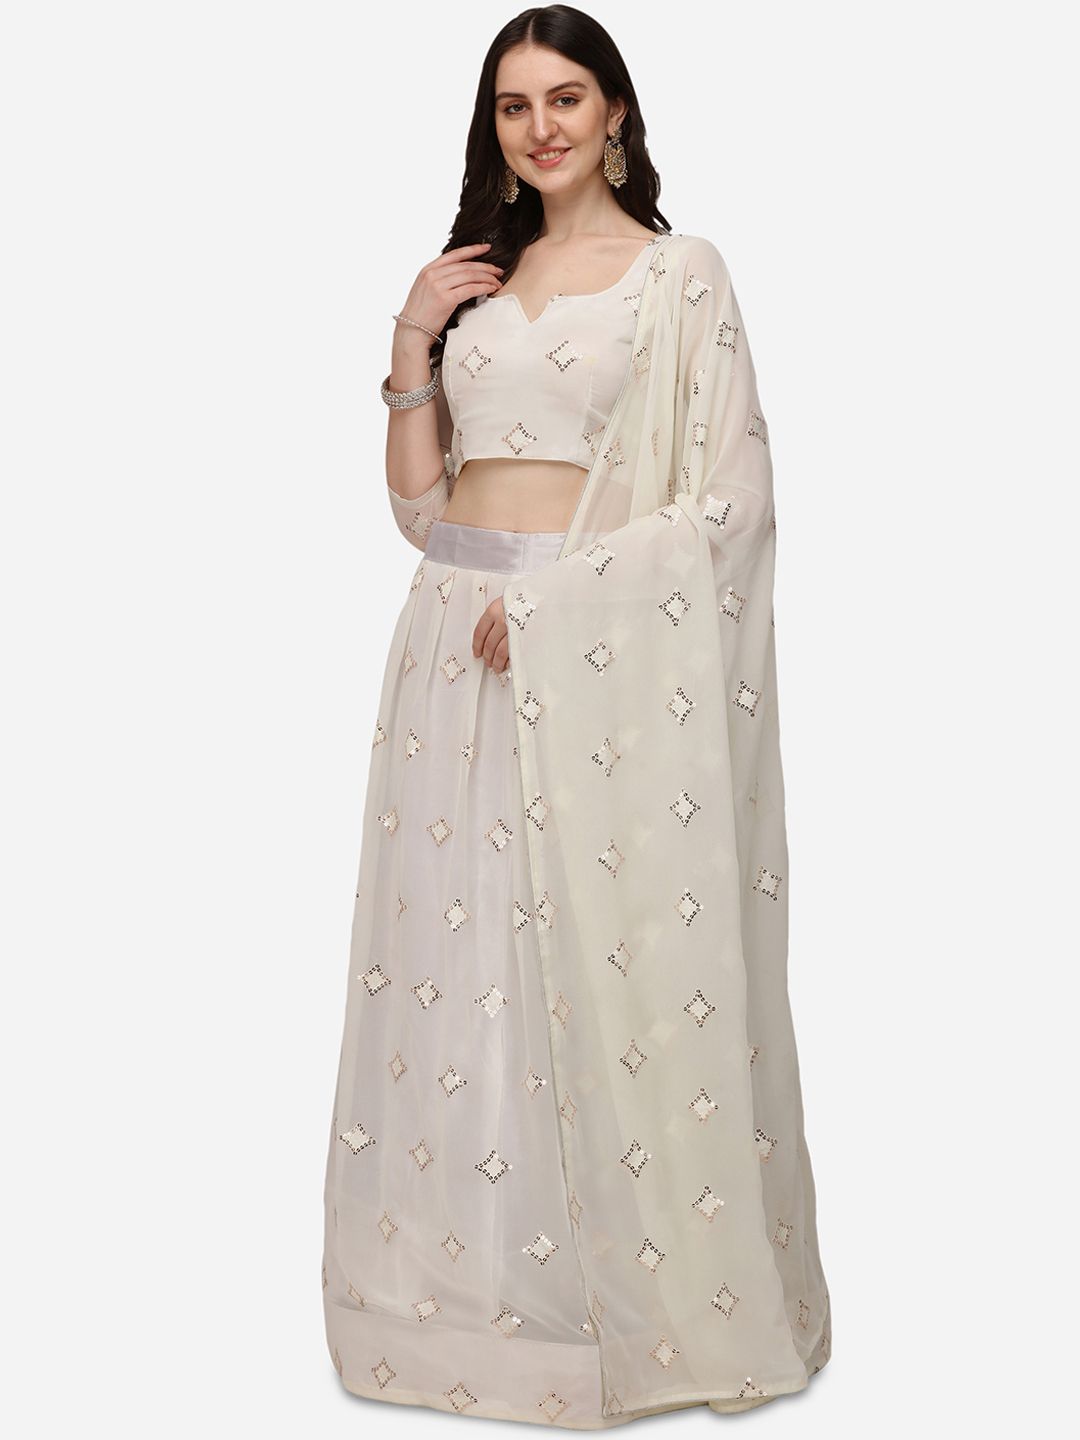 Pratham Blue White Embroidered Sequinned Semi-Stitched Lehenga & Unstitched Blouse With Dupatta Price in India